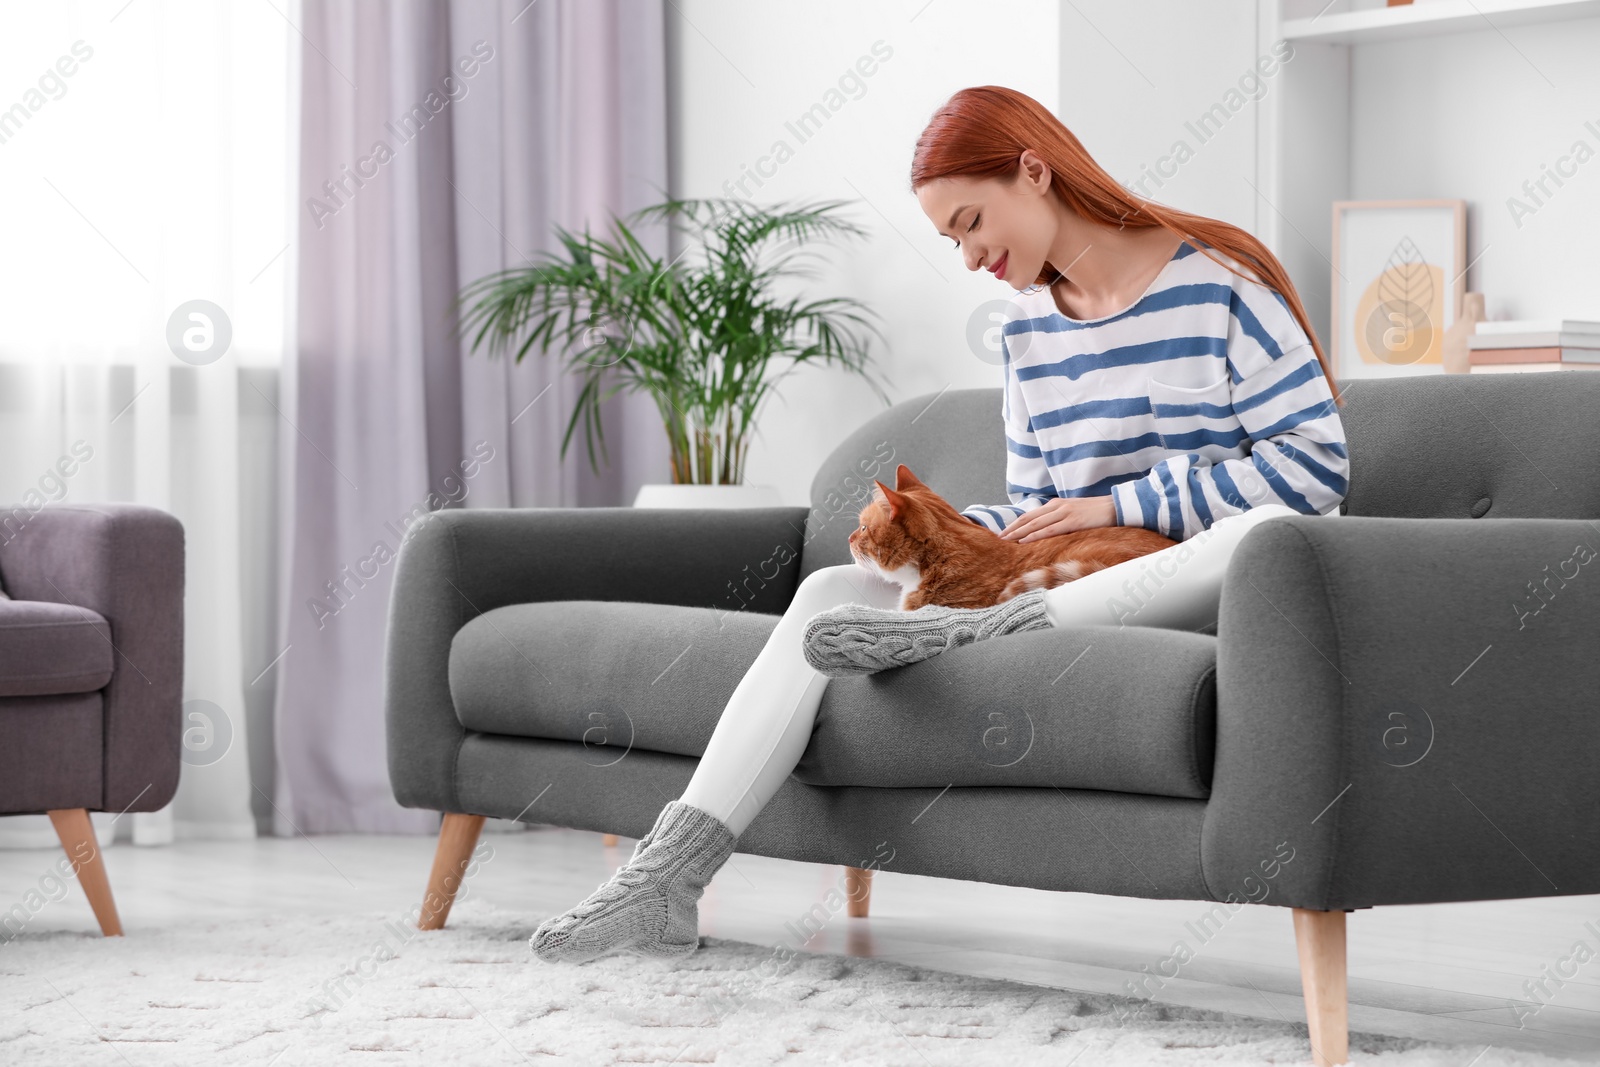 Photo of Woman with her cute cat on sofa at home